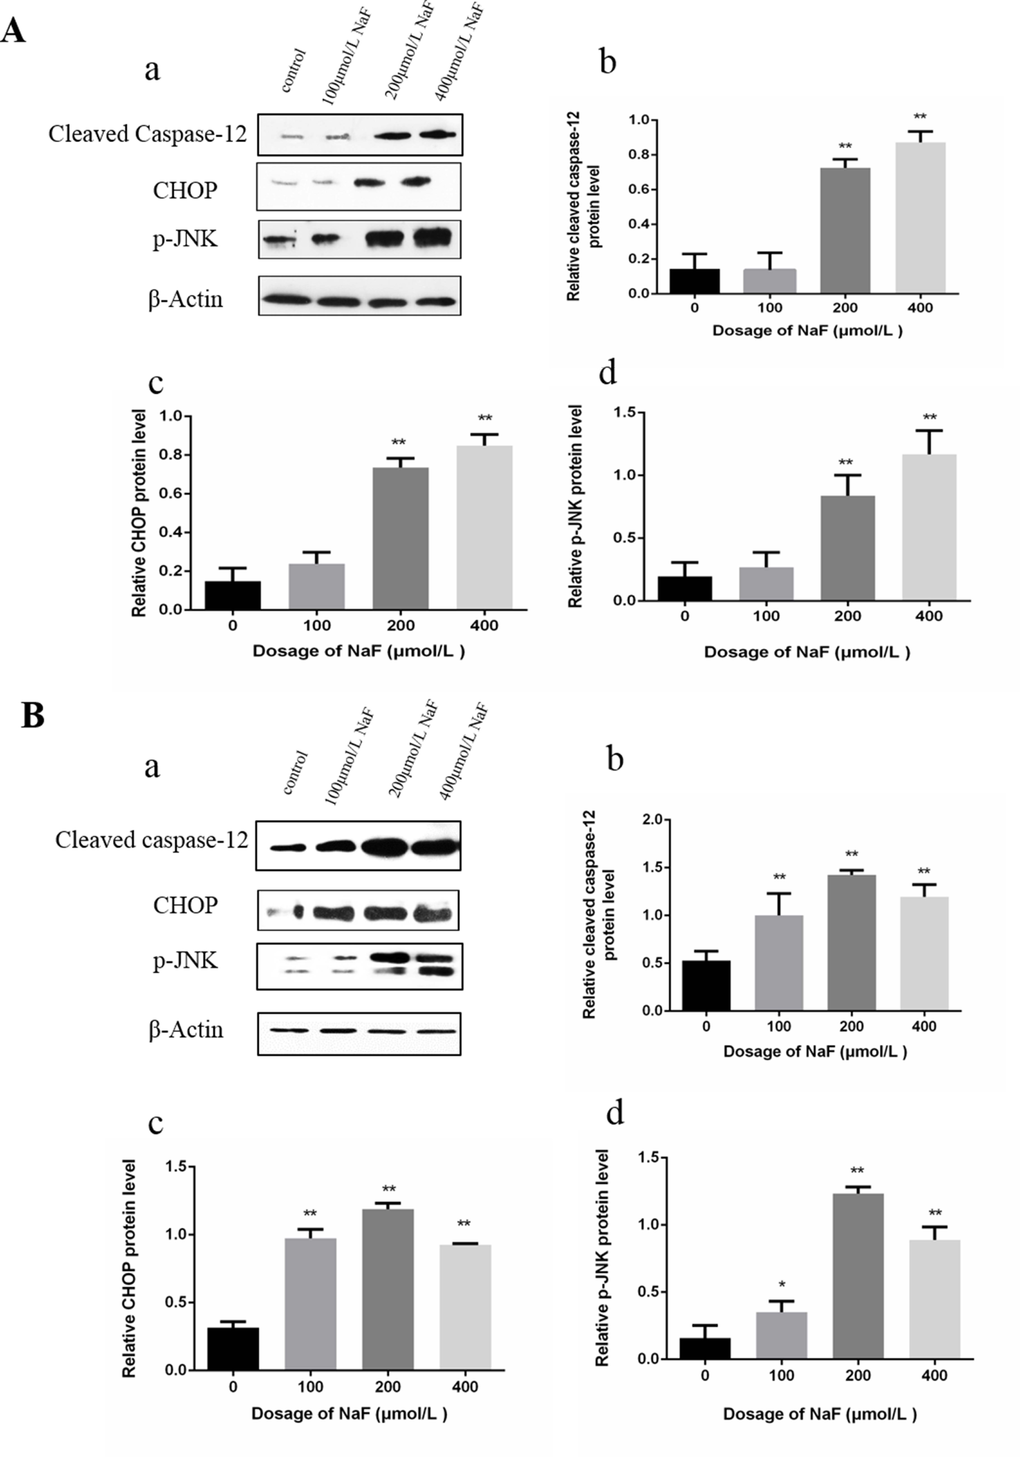 Effect of NaF treatment on protein expression levels of cleaved caspase-12, p-JNK, CHOP in cultured splenic lymphocytes at 24 h (A) and 48 h (B). (a) The western blot assay. (b-d) Quantitative analysis of protein expression. Data are presented with the means ± standard deviation, * p p 